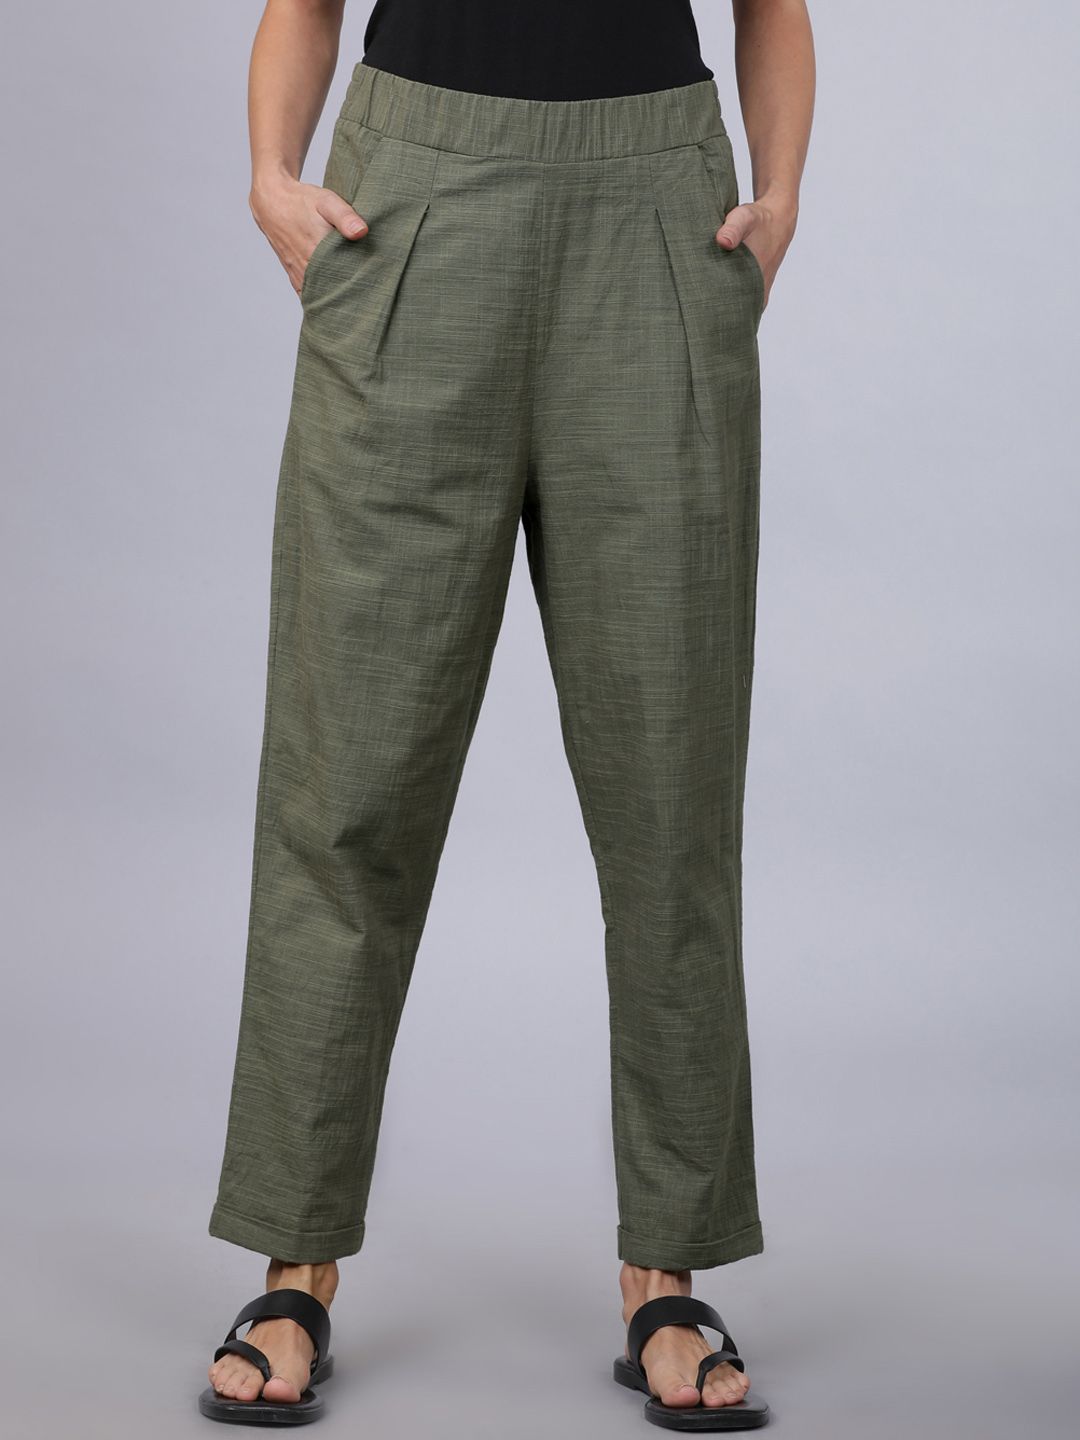 Tokyo Talkies Women Olive Green Trousers Price in India